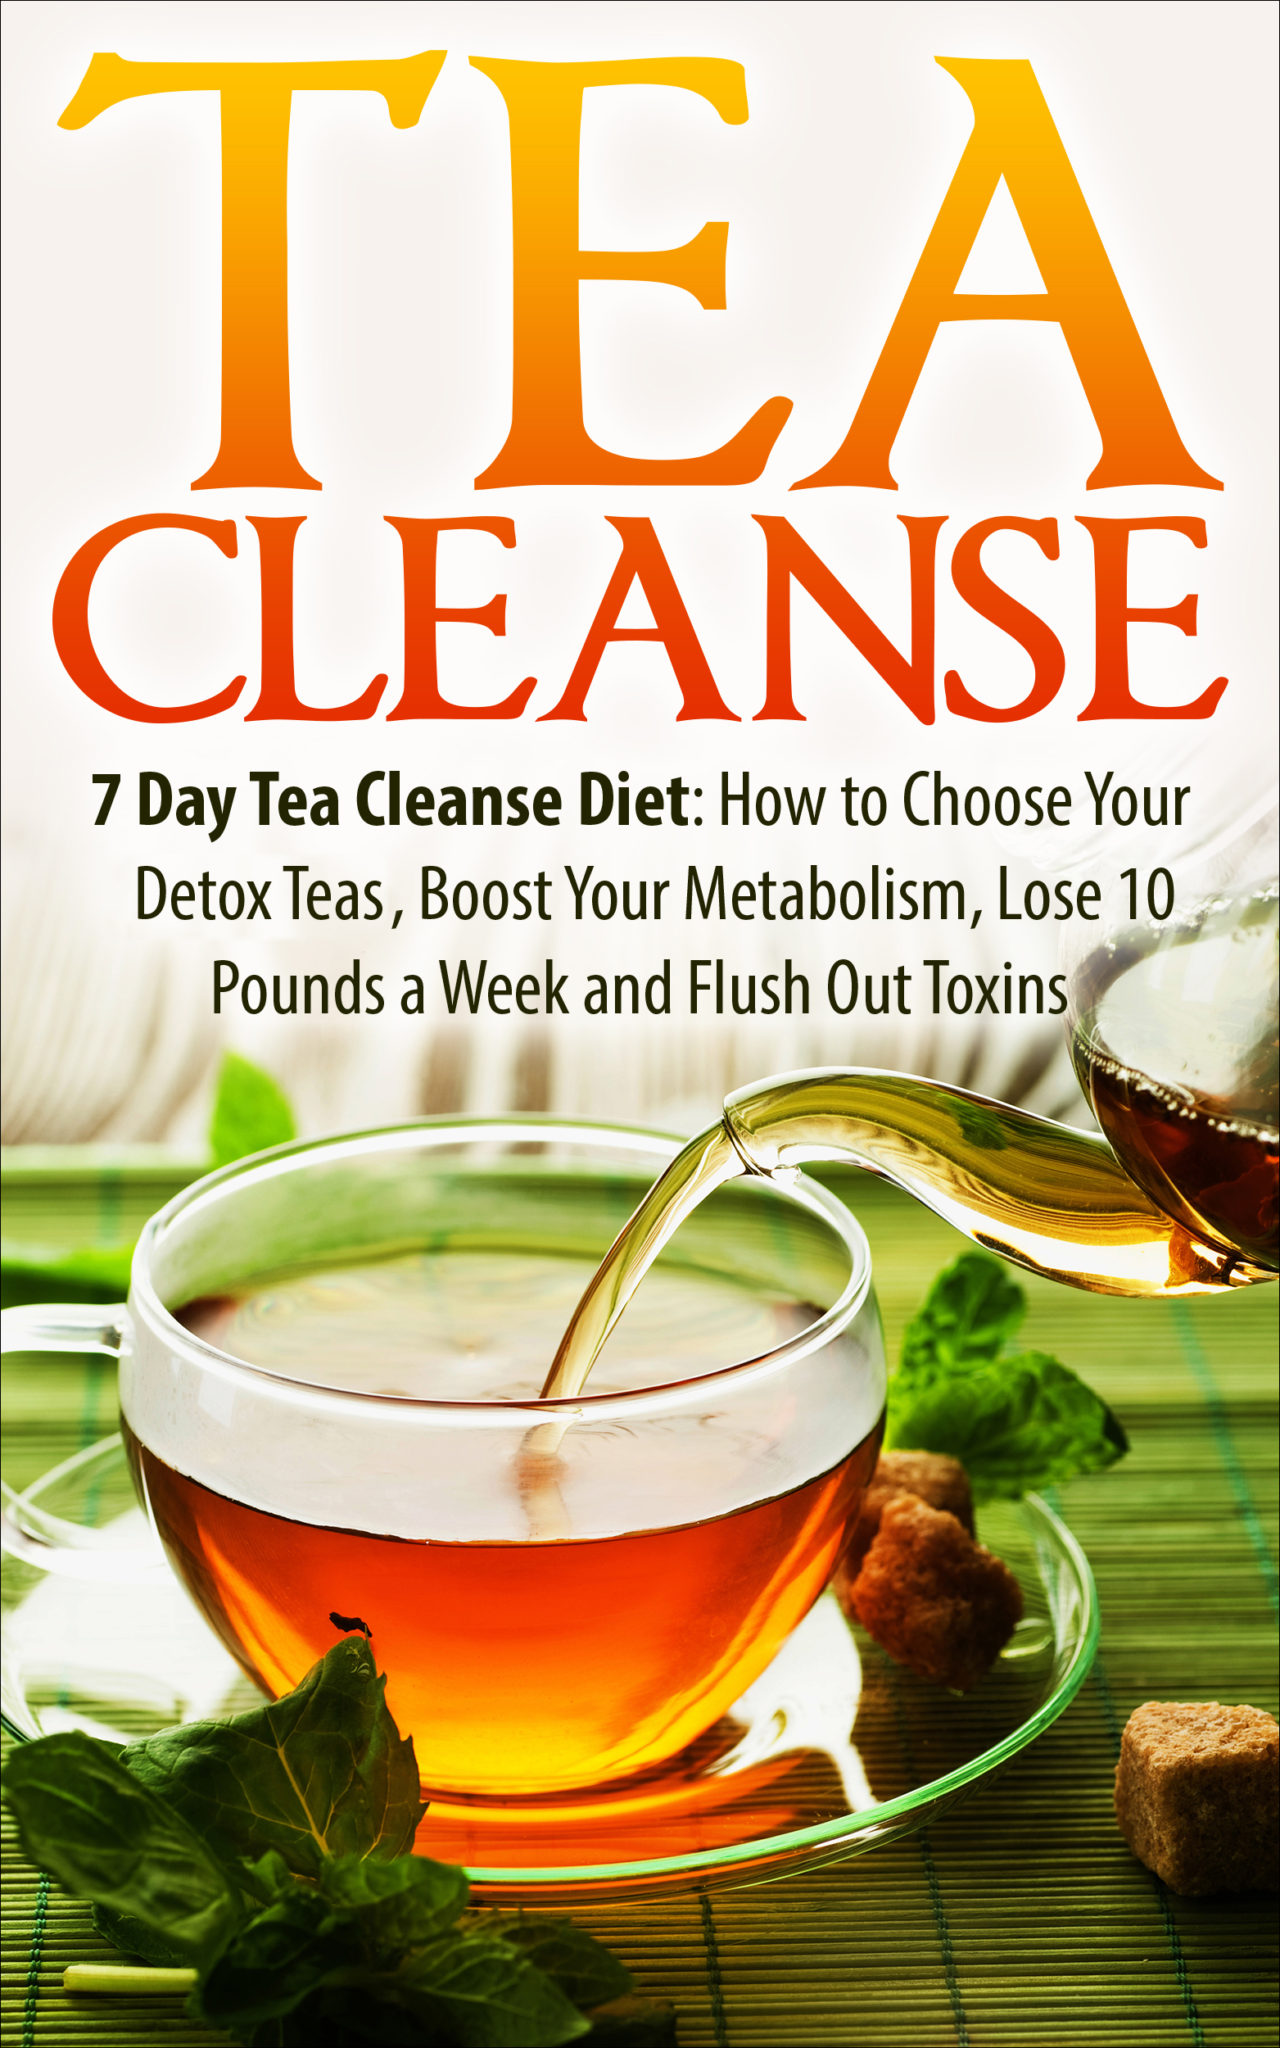 FREE: Tea Cleanse: 7 Day Tea Cleanse Diet: How to Choose Your Detox Teas, Boost Your Metabolism, Lose 10 Pounds a Week and Flush Out Toxins by James Wayne